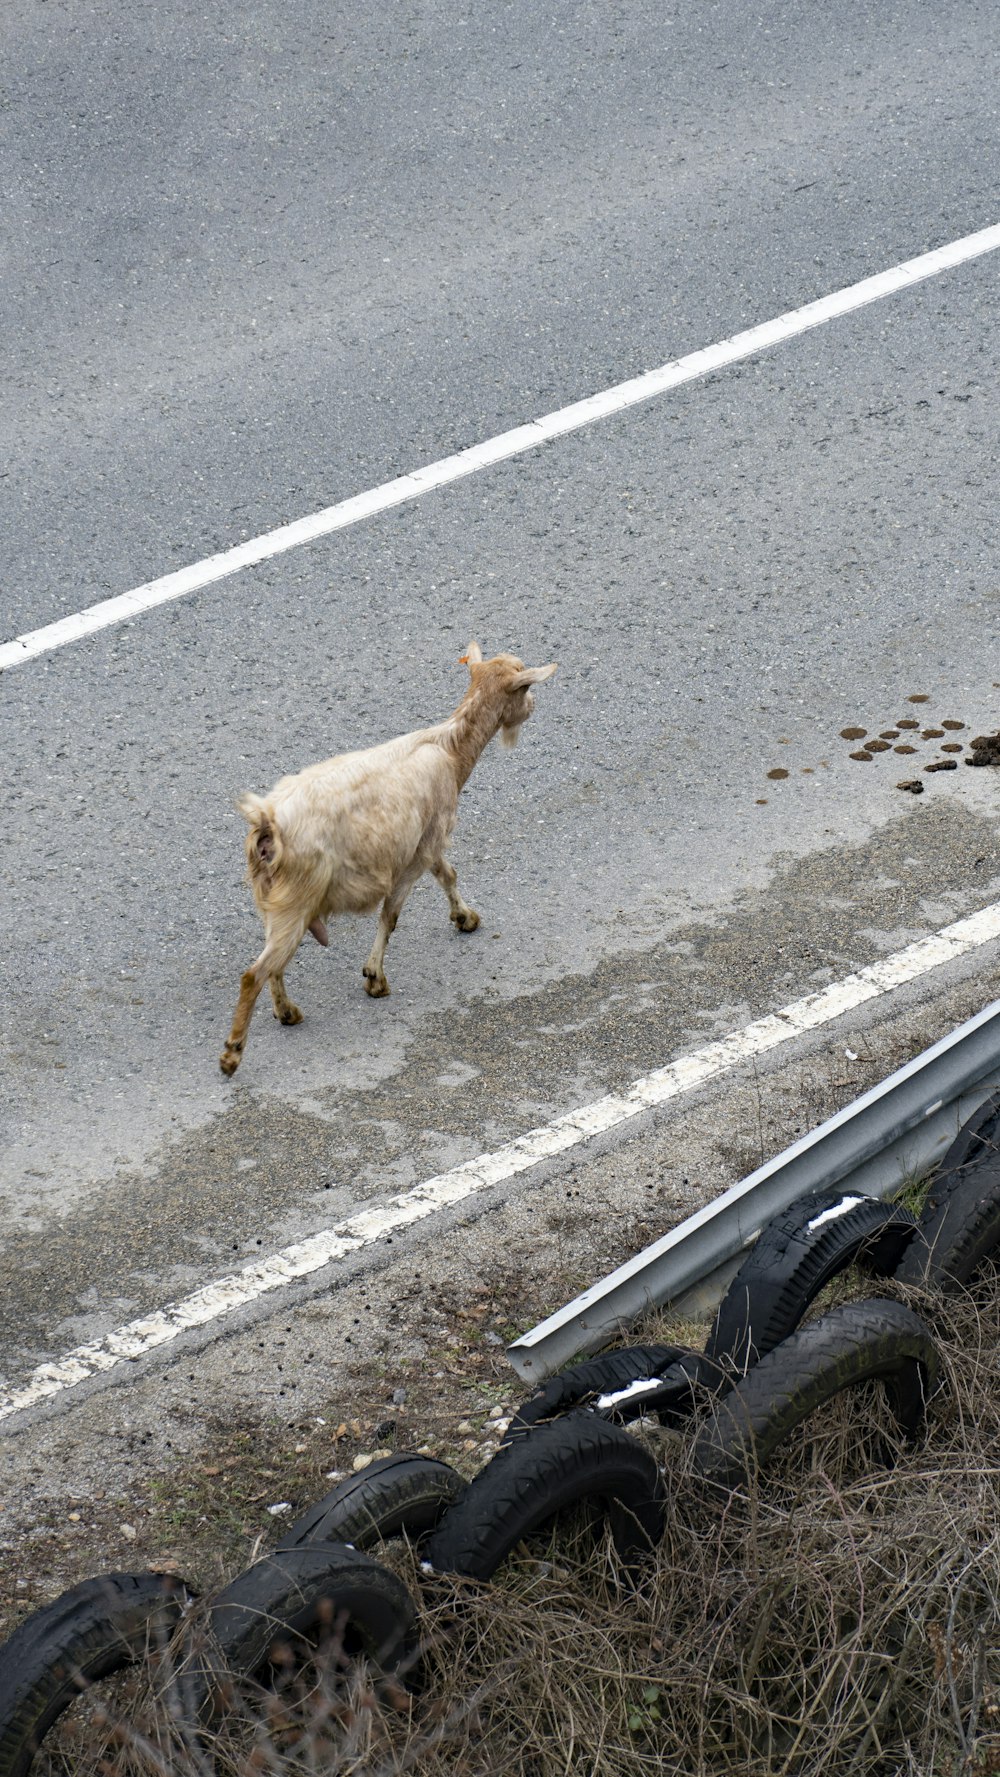 a sheep walking down a road next to a pile of tires